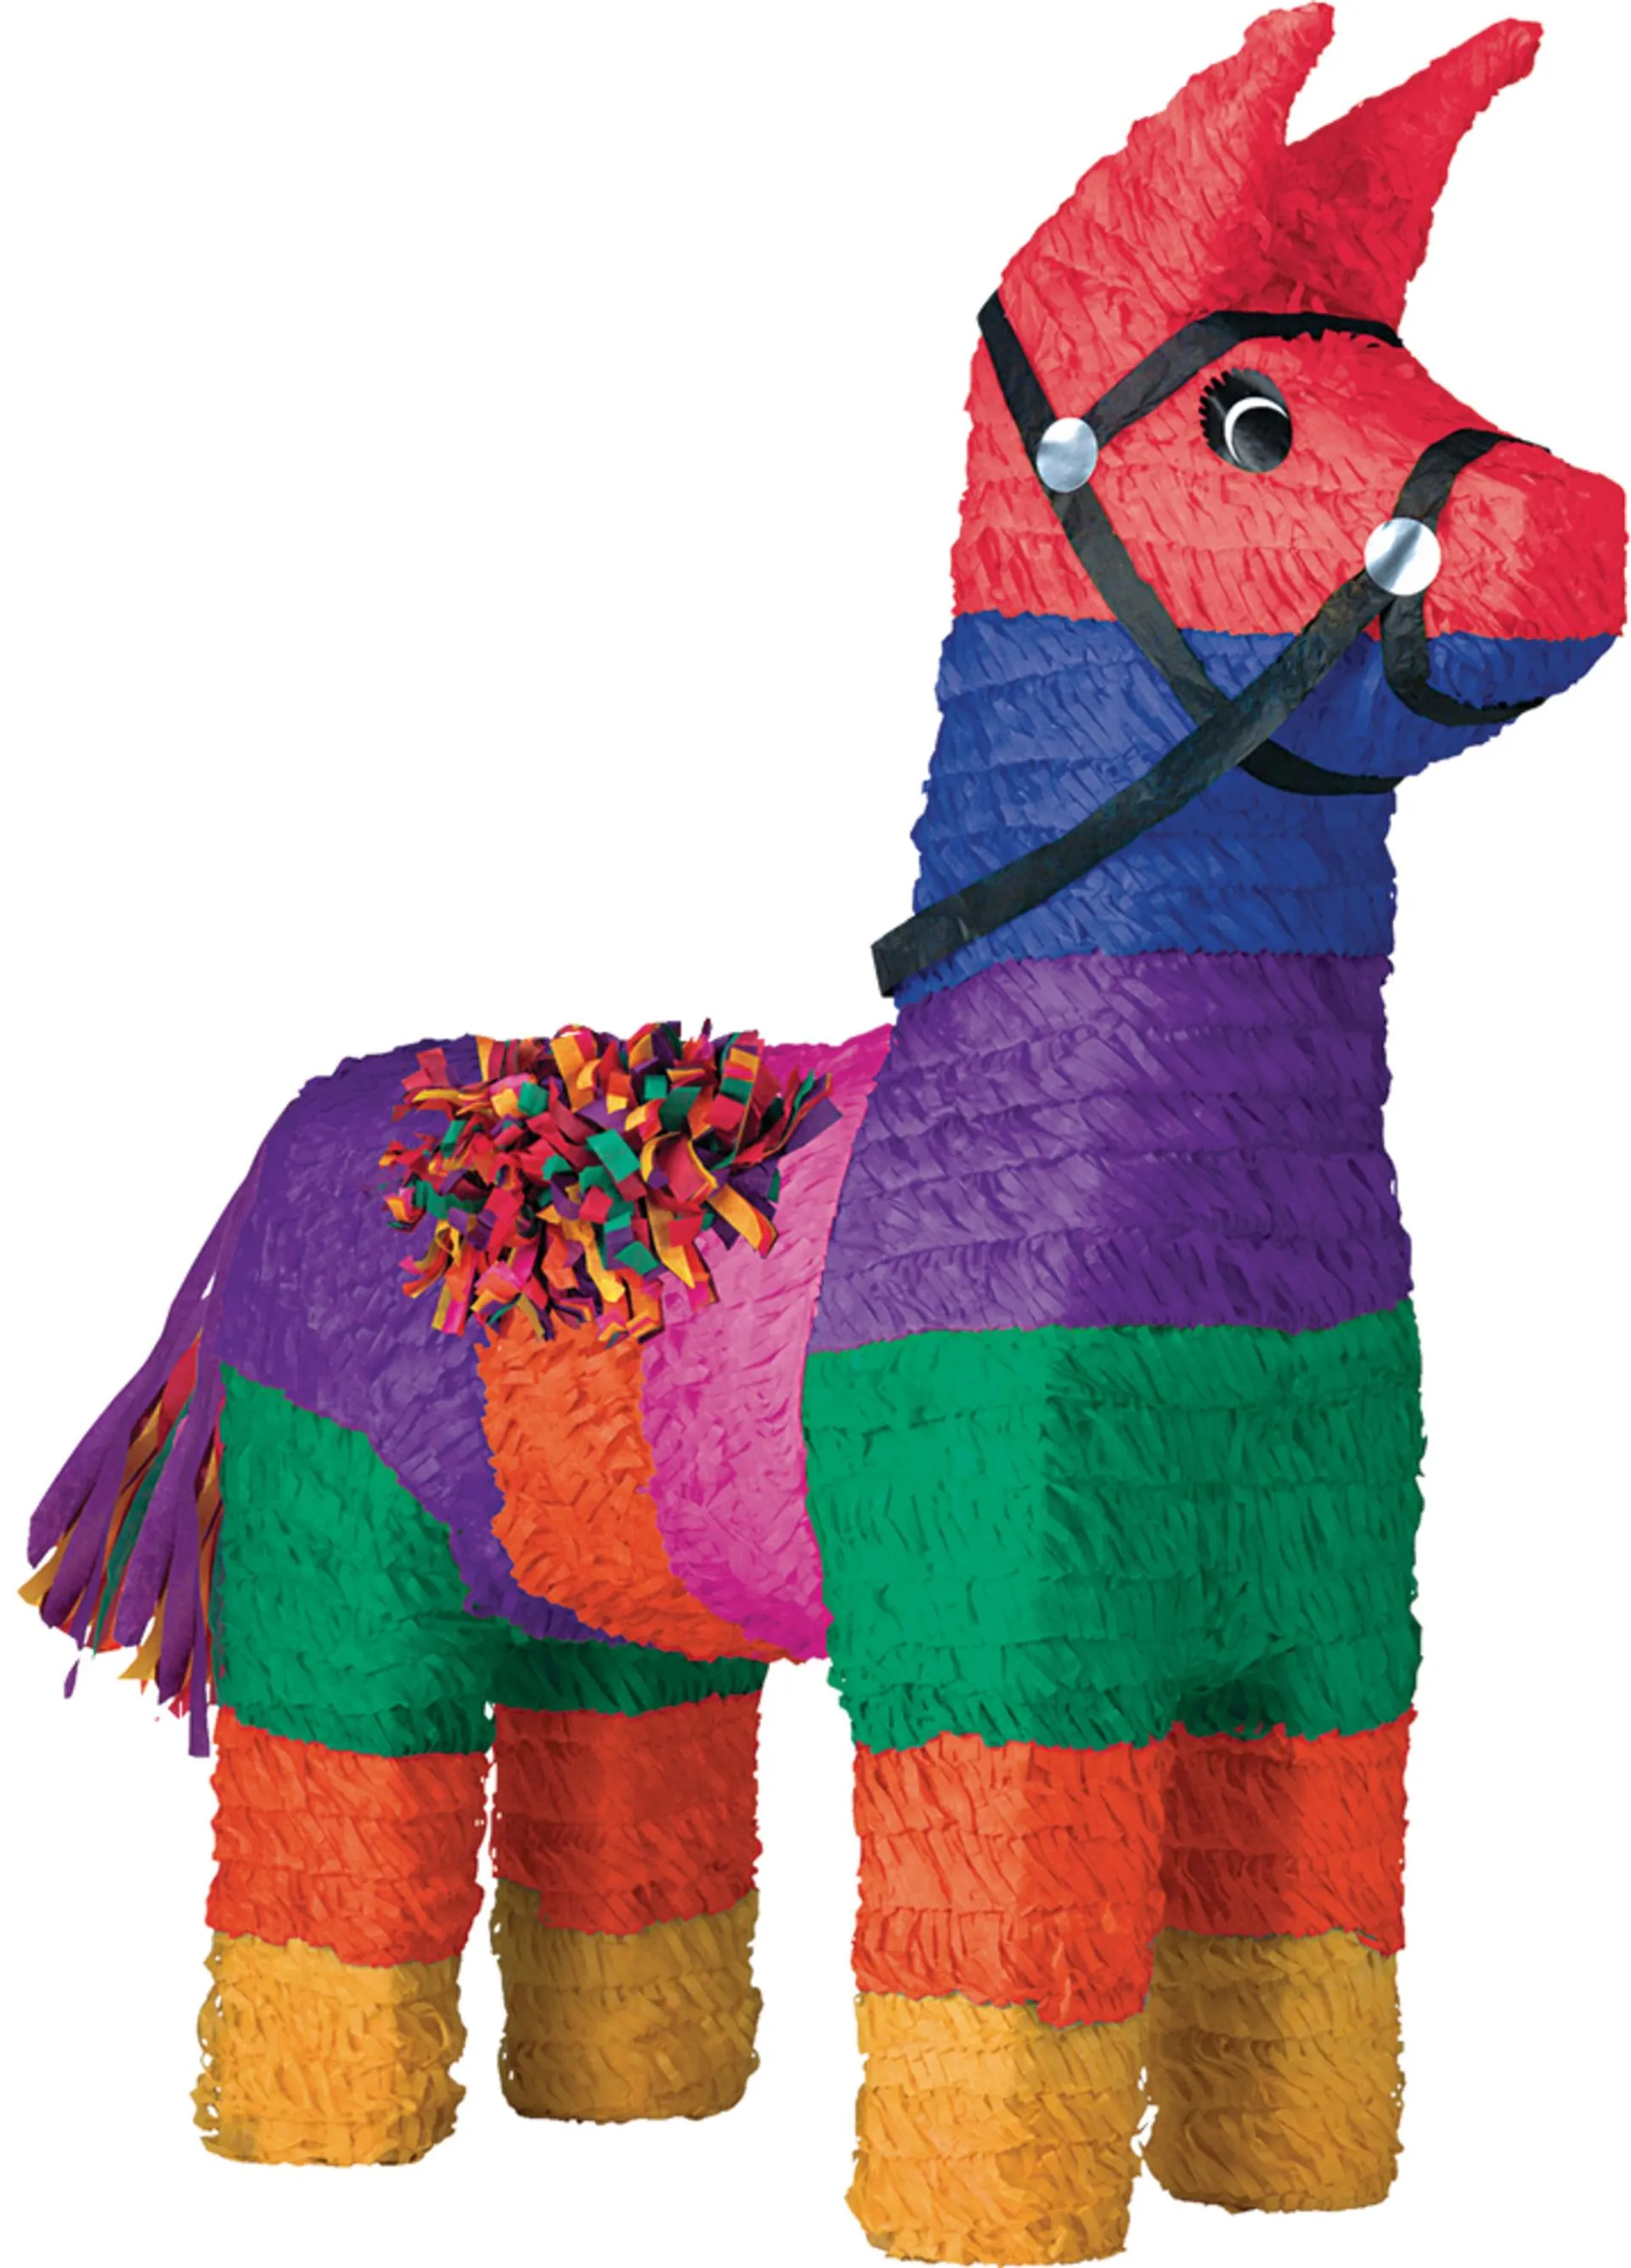 Donkey Pinata Hanging Decoration, Multi-Coloured, 27-in, Holds 2lb of Pinata Filler, for Birthday/Fiesta Parties